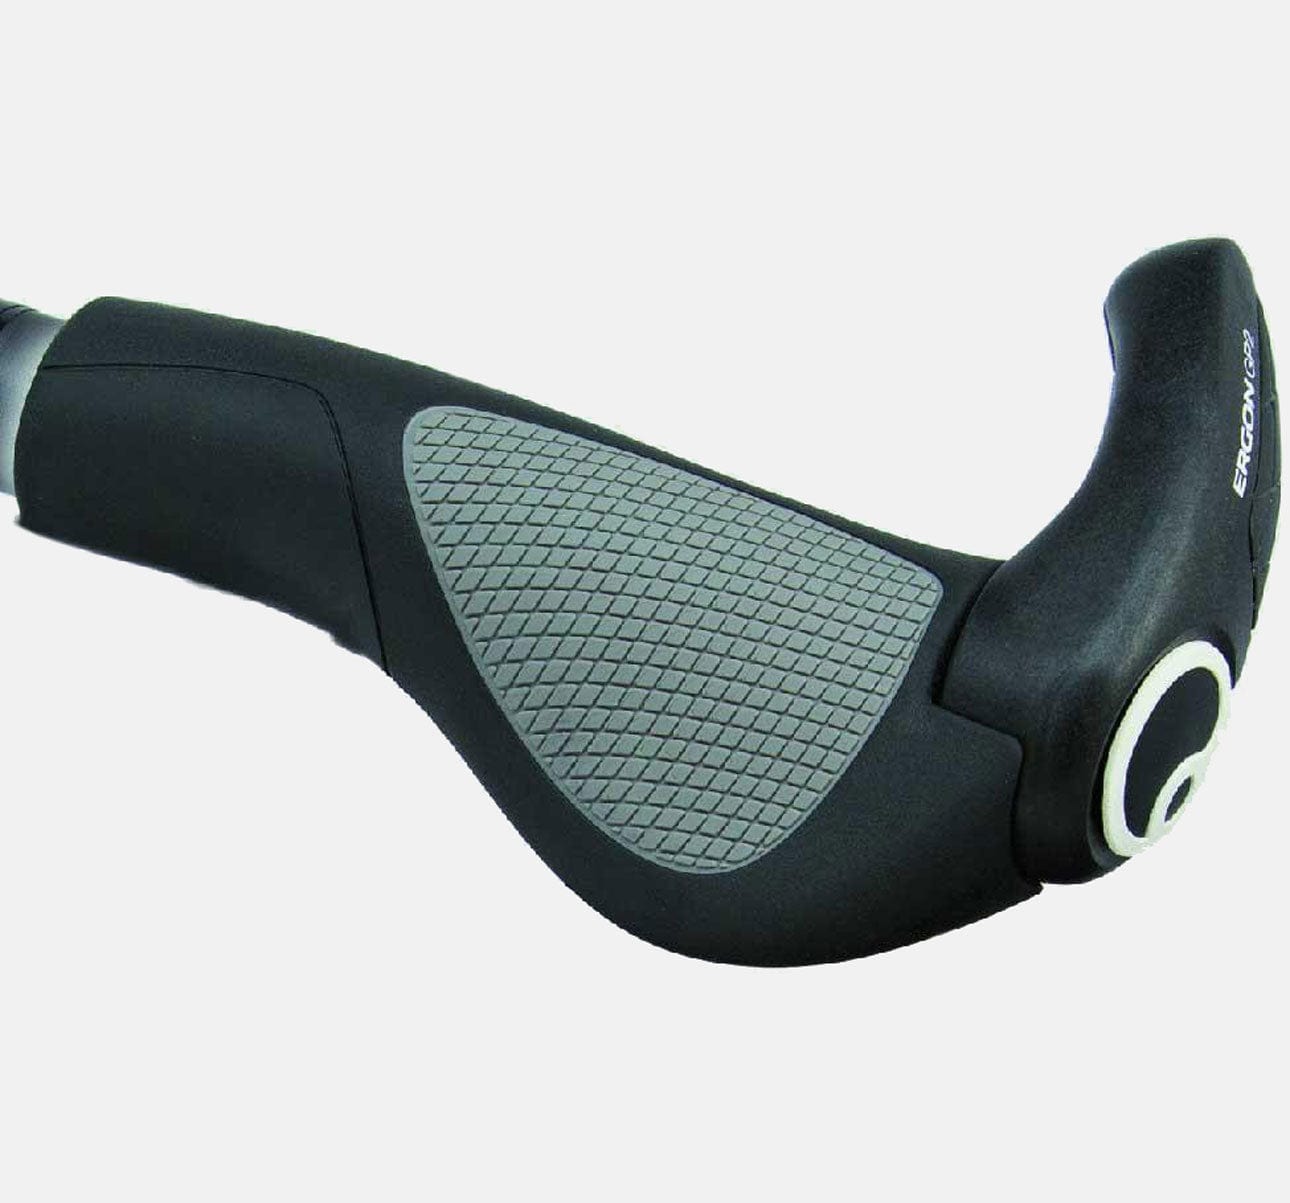 Brooks x Ergon GP1 Leather Grips – Curbside Cycle